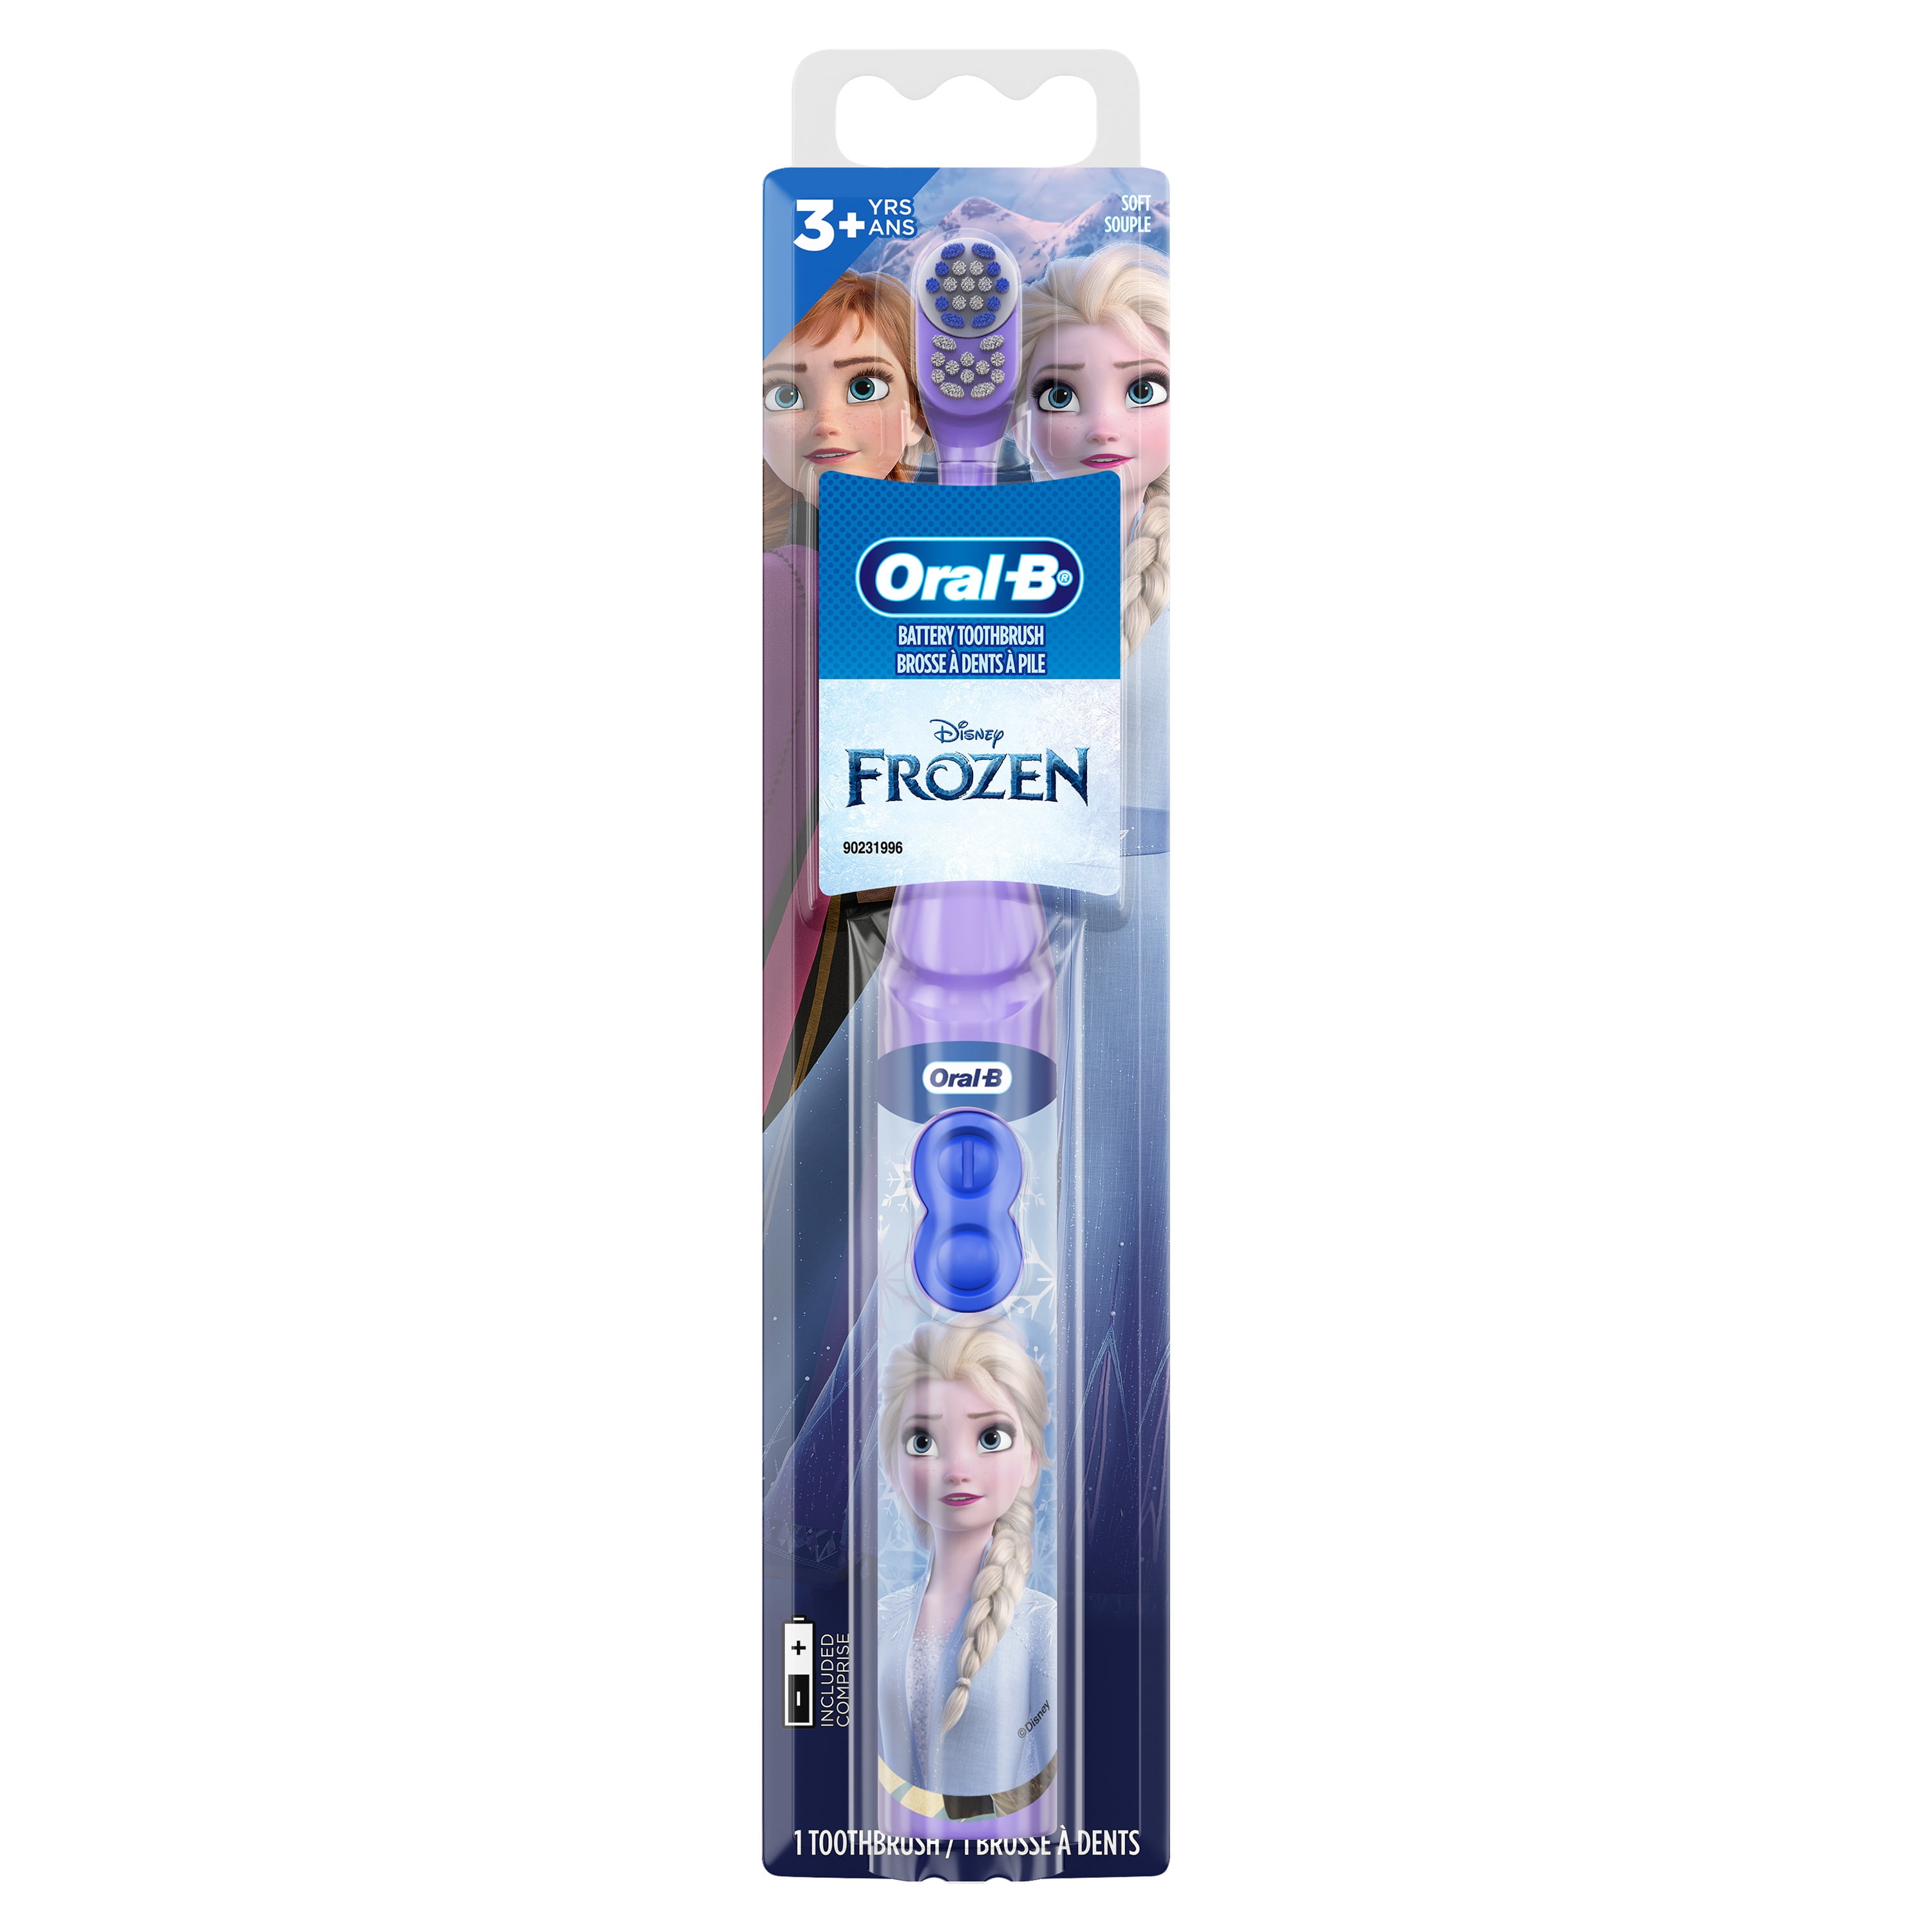 Oral-B Kid's Battery Toothbrush featuring Disney's Frozen